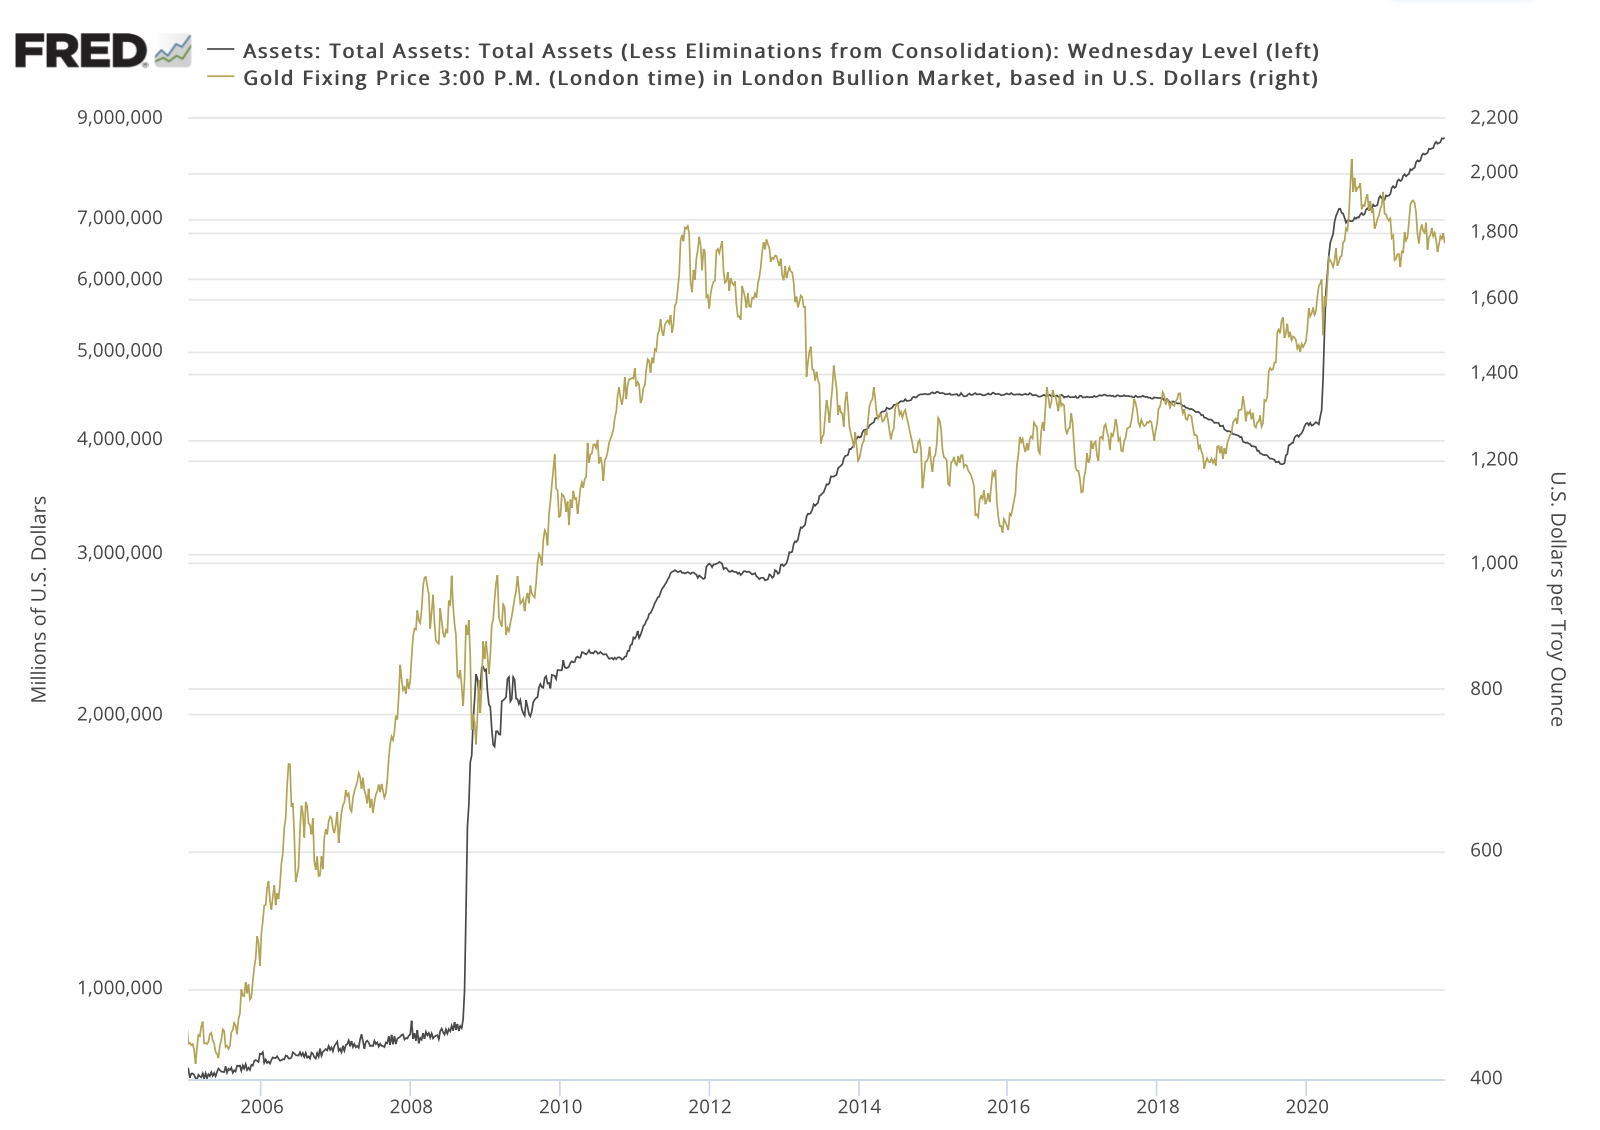 overlay line chart showing the Fed balance sheet and gold price 2006-present